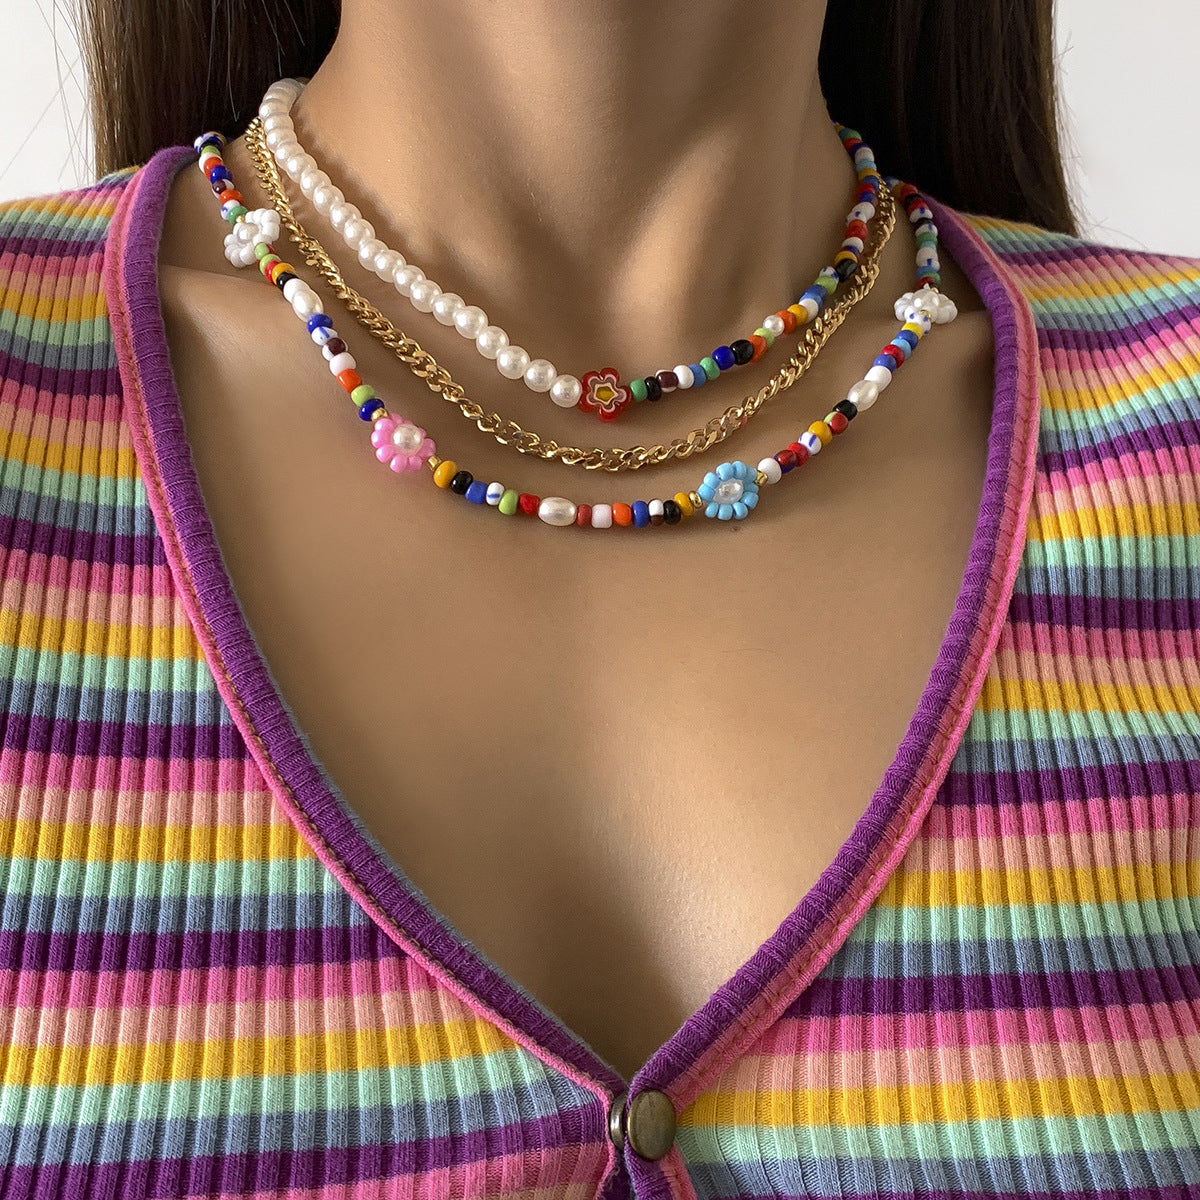 Gorgeous 3-Piece Colorful Pearl Decor Beaded Necklace - Handmade with Love!